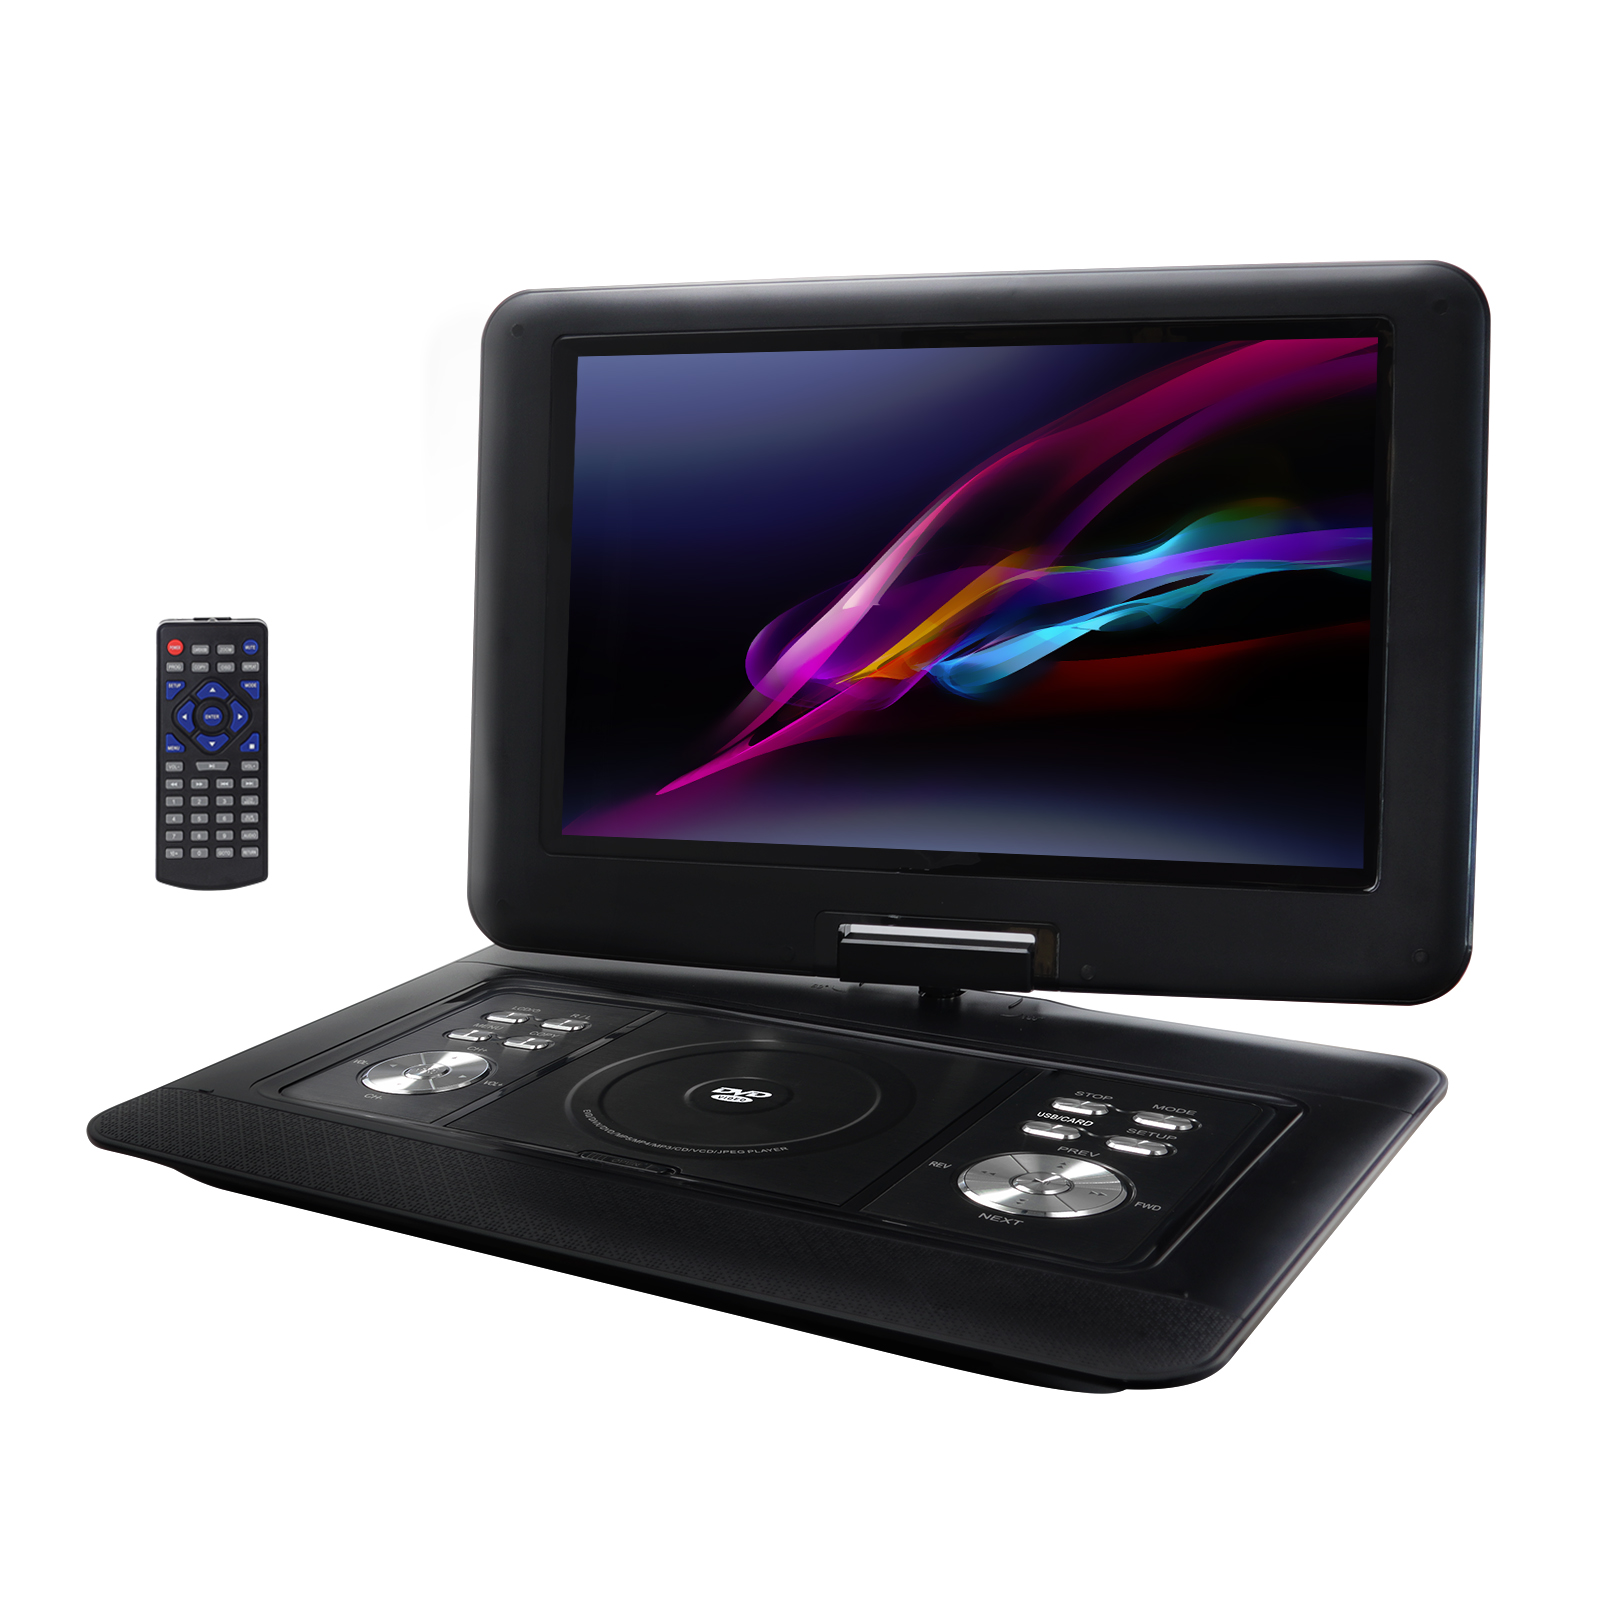 Trexonic 14.1" Portable DVD Player with TFT-LCD Screen and USB/SD/AV Inputs - image 1 of 9